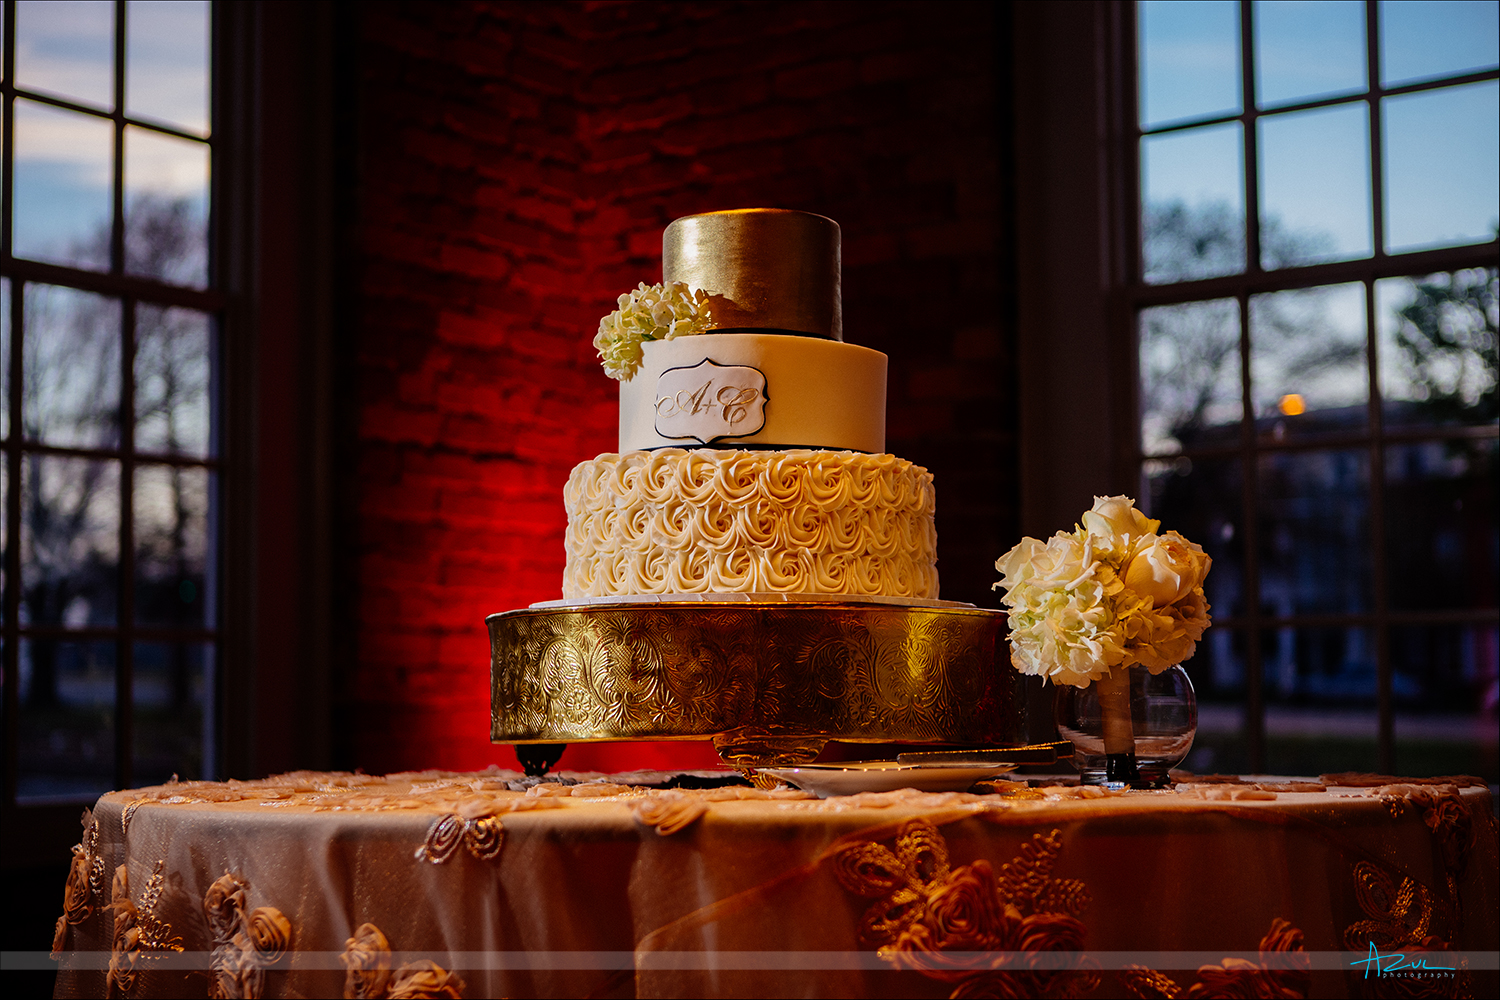 Perfect wedding day cake for the couple and the details were delicious and amazing at The Cotton Room in Durham NC